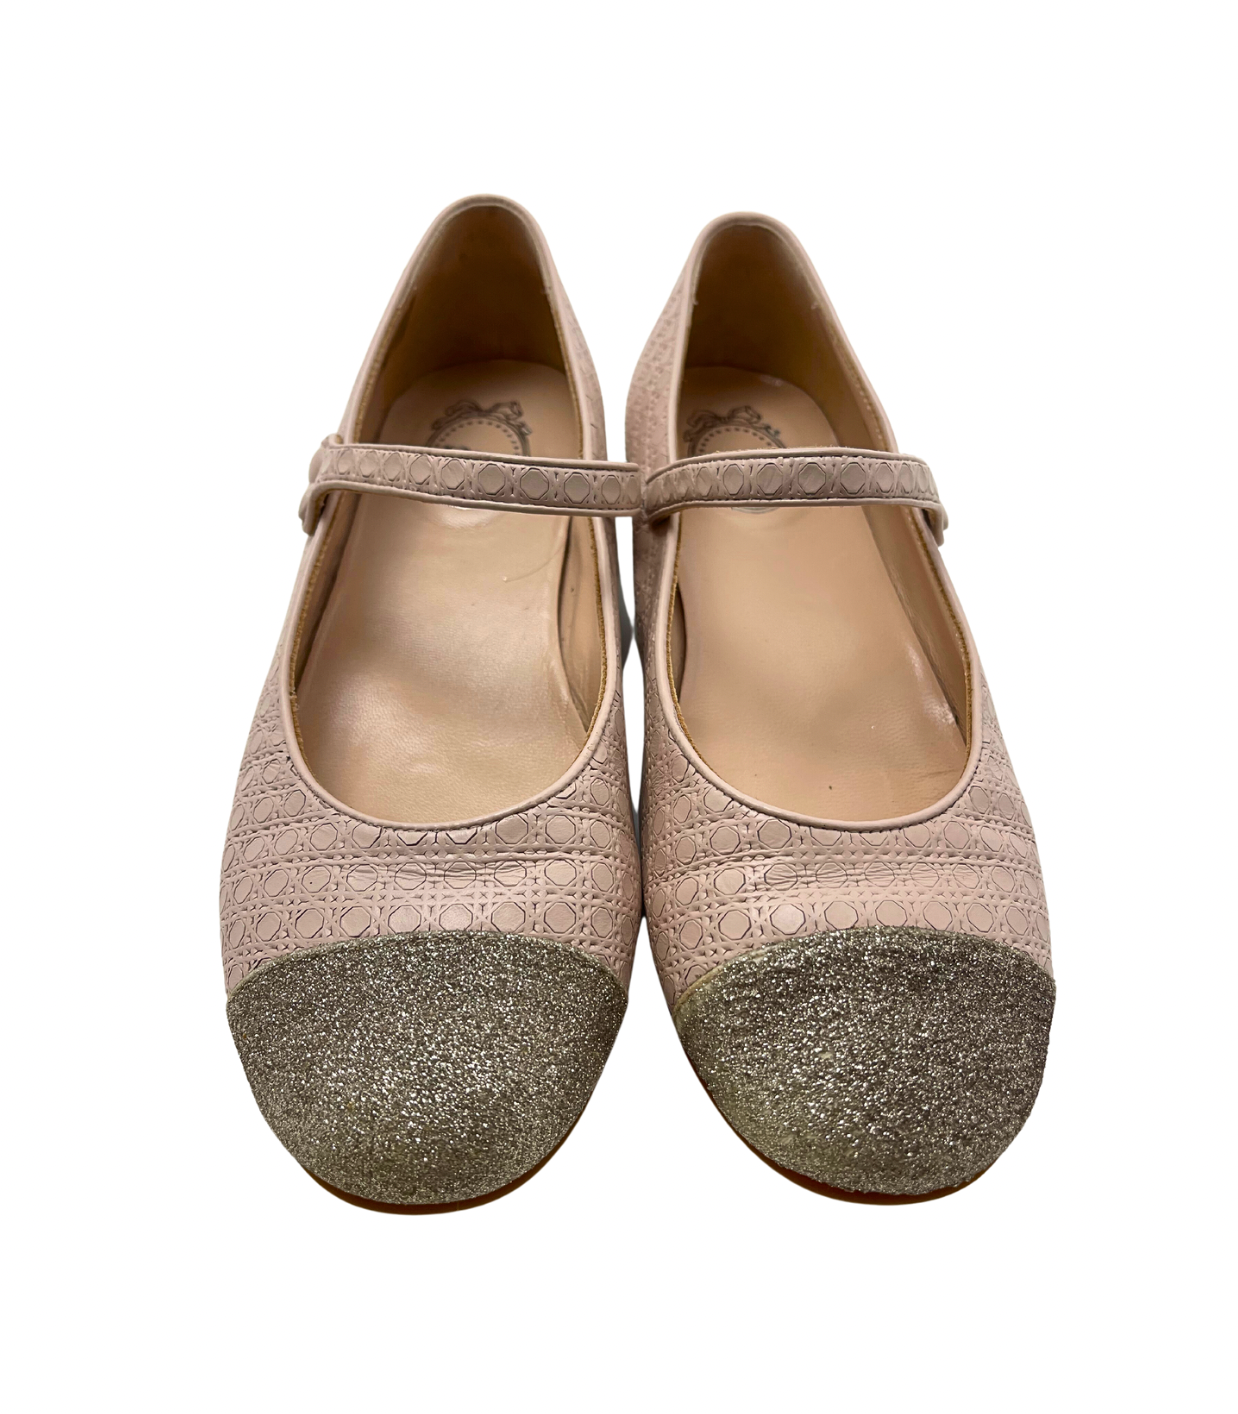 DIOR - Pink leather ballet flats, sequined toe - 36